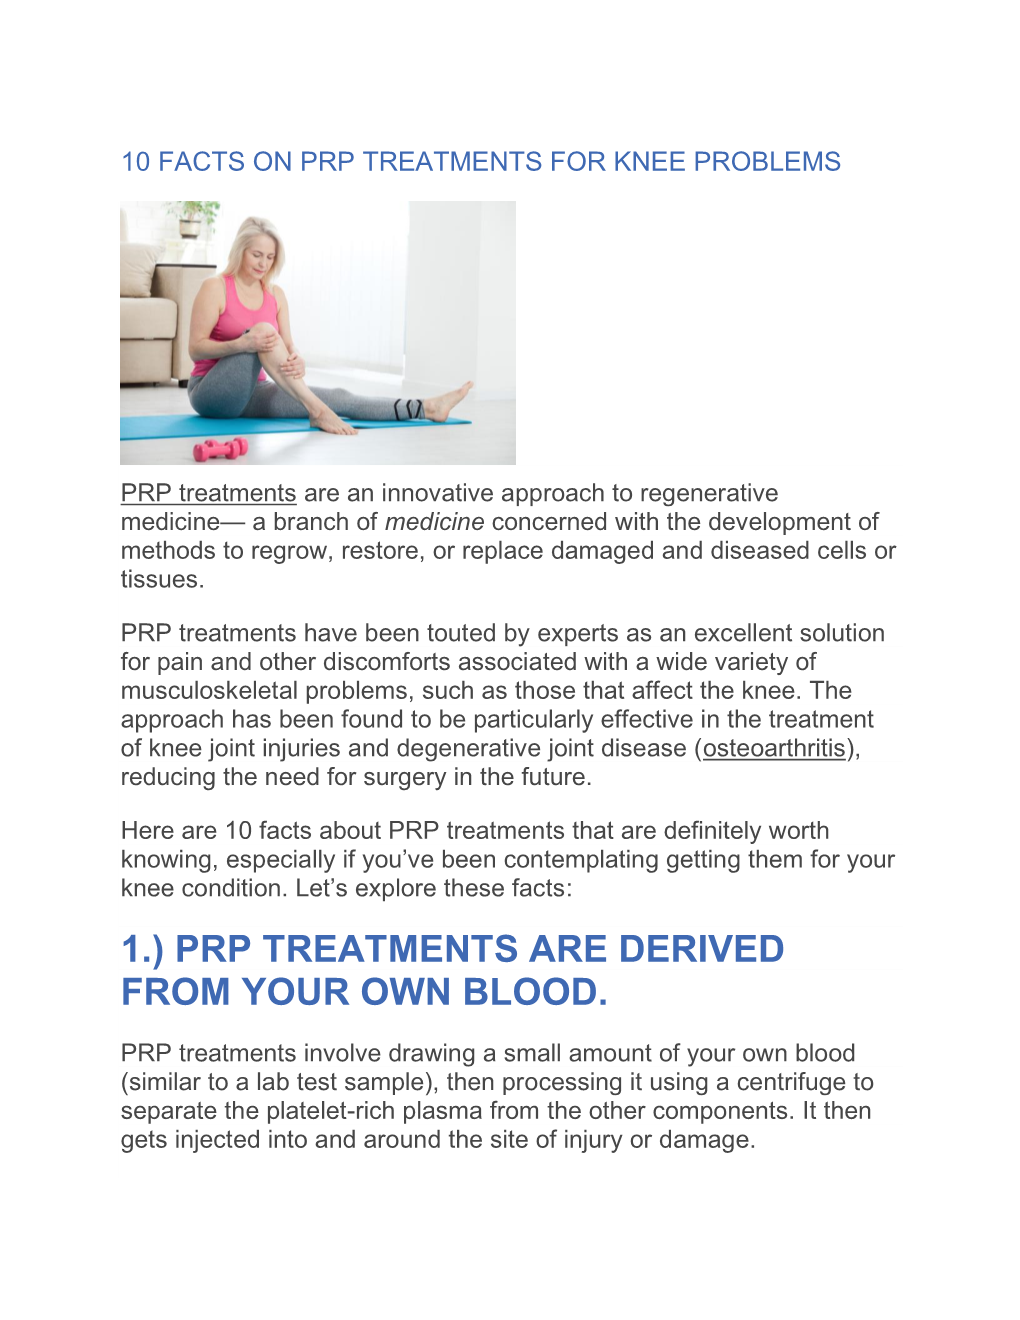 10 Facts on Prp Treatments for Knee Problems